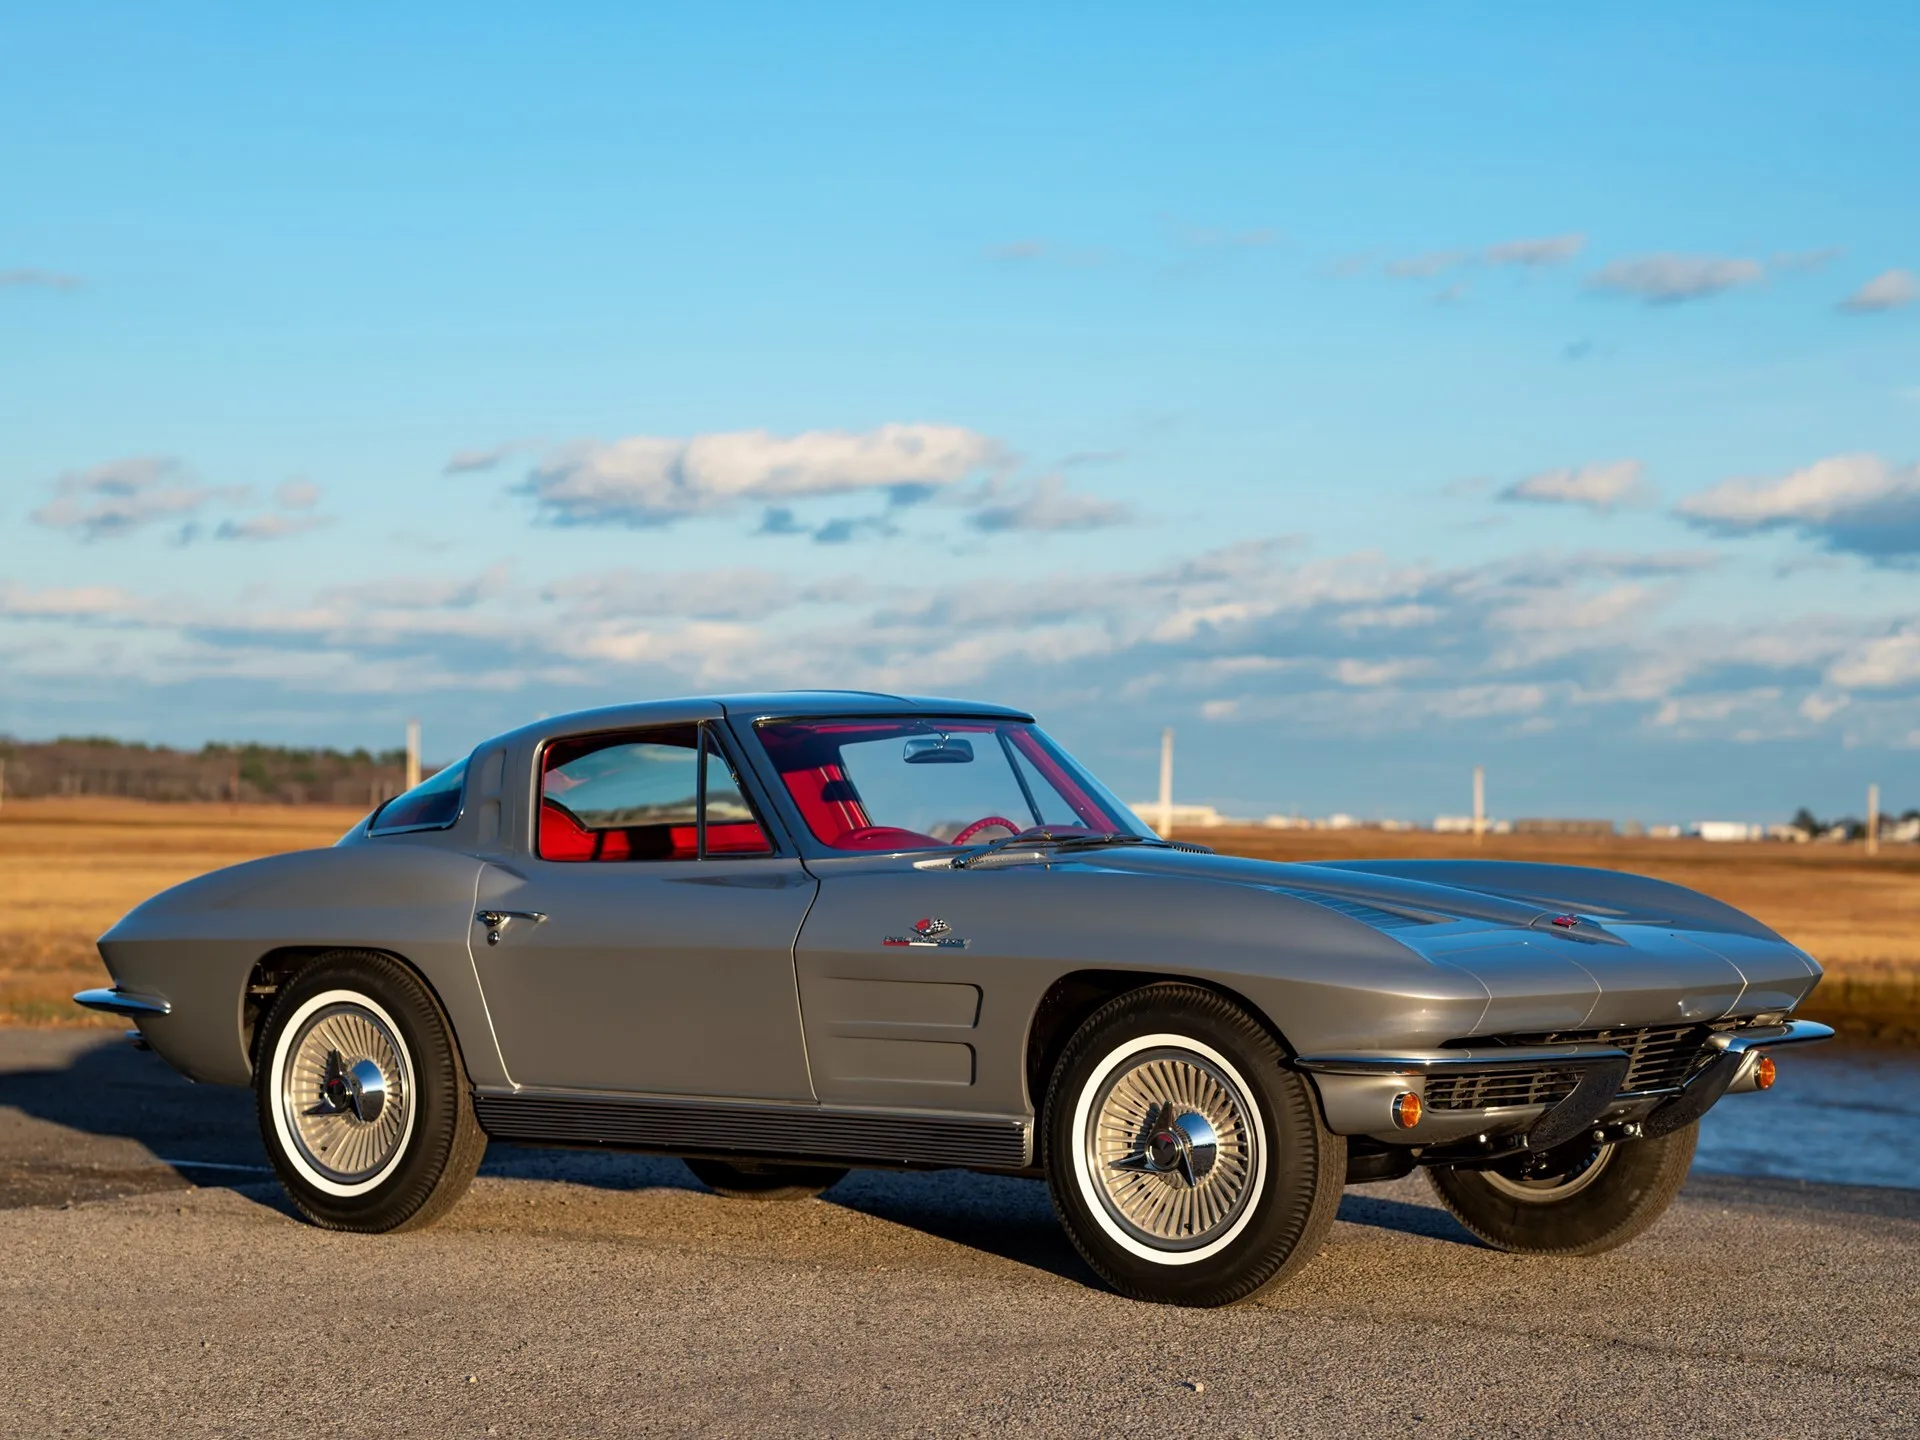 Corvette Of The Day: 1963 Chevrolet Corvette Sting Ray 'Fuel-Injected' Coupe